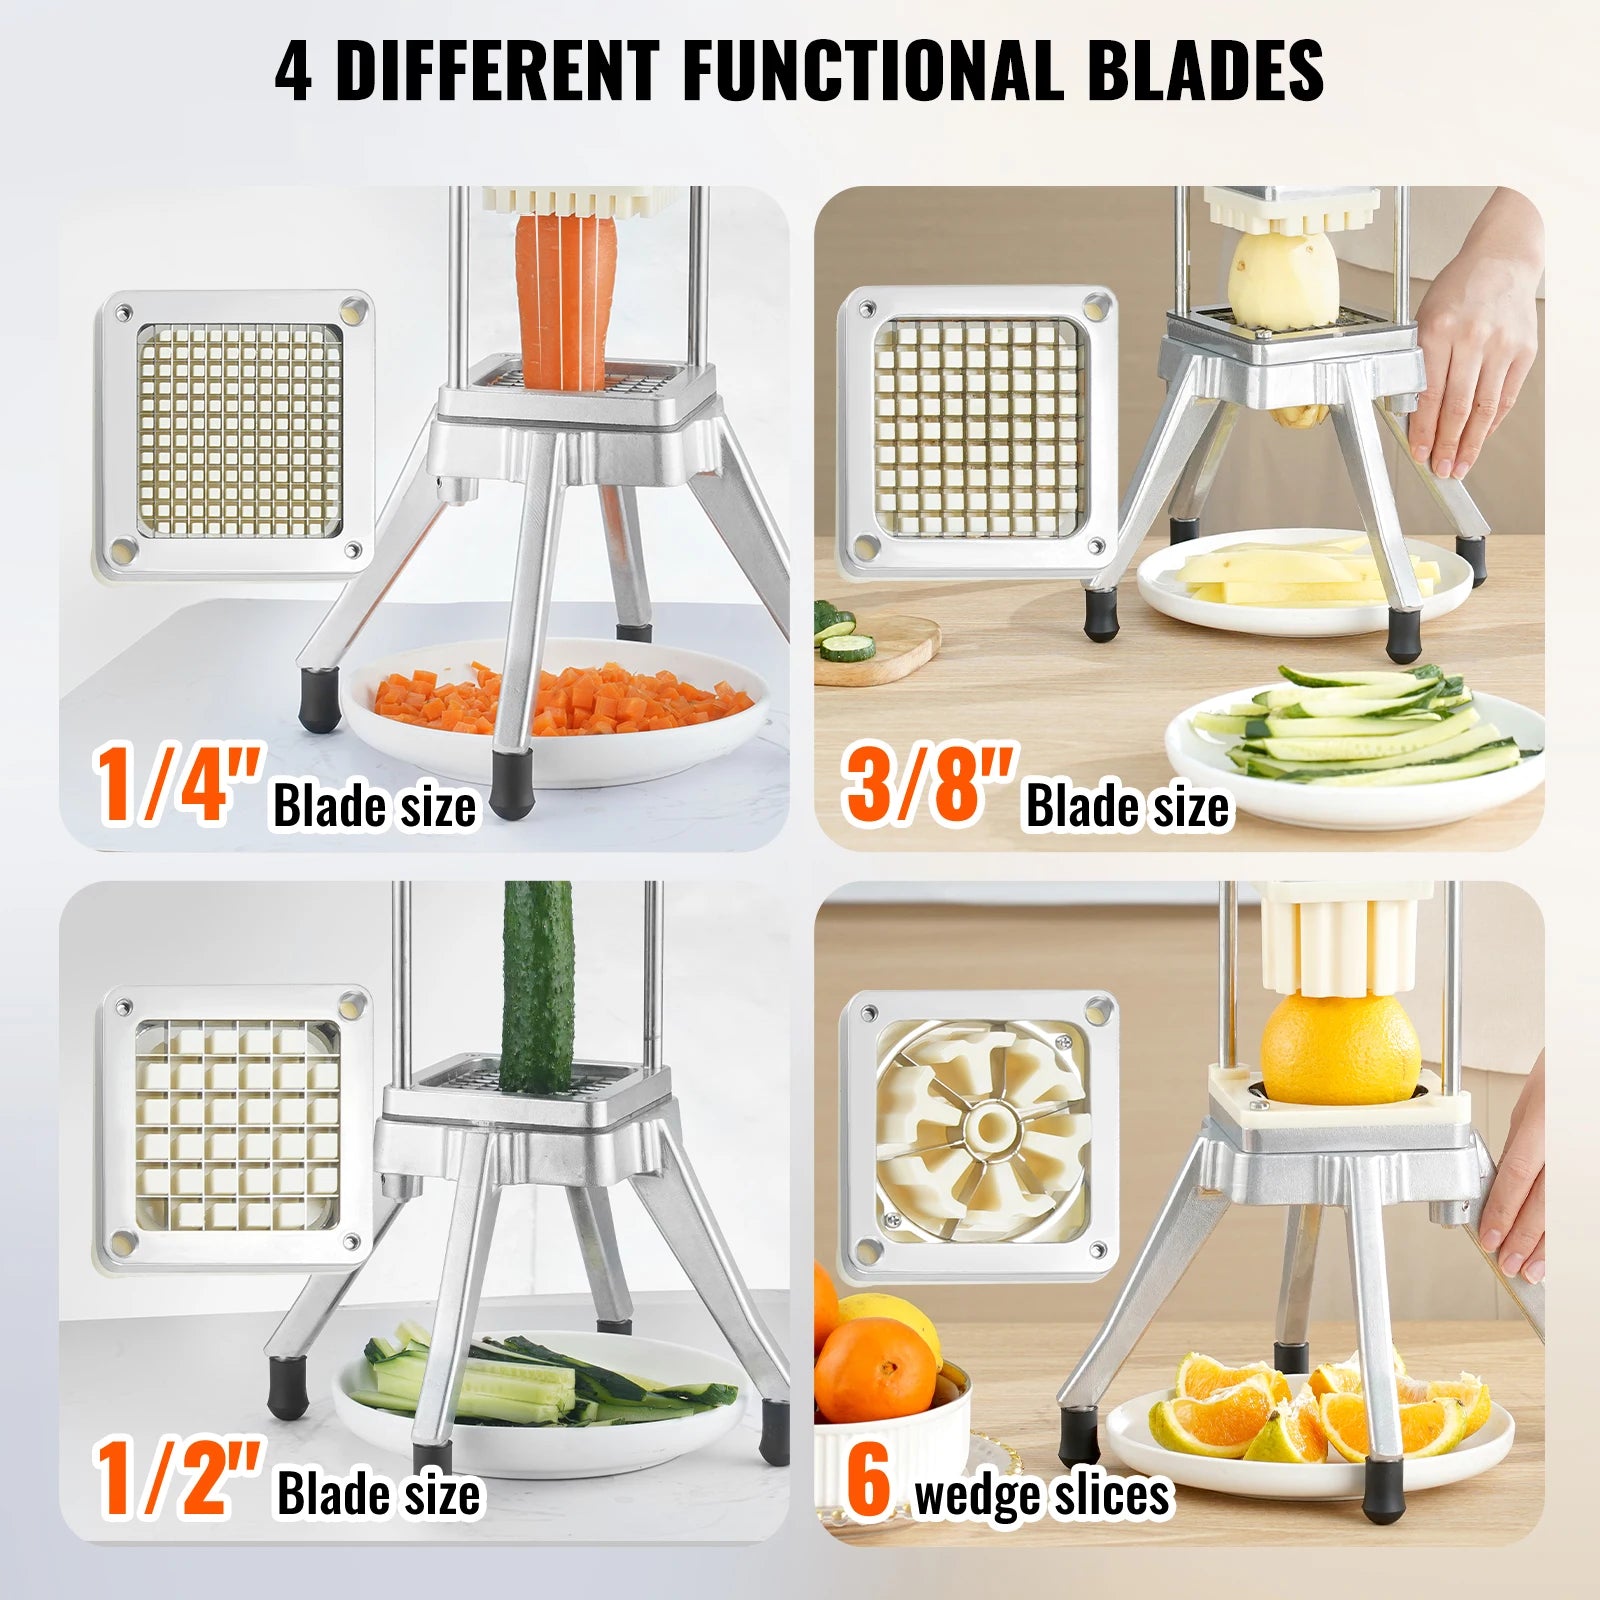 Cloud Discoveries Commercial Vegetable Chopper - Heavy-Duty Stainless Steel - 4 Blades - Ergonomic Handle - Stable & Easy to Clean - Perfect for Restaurants and Home Kitchens - Prepare salads, French fries, and desserts with ease.